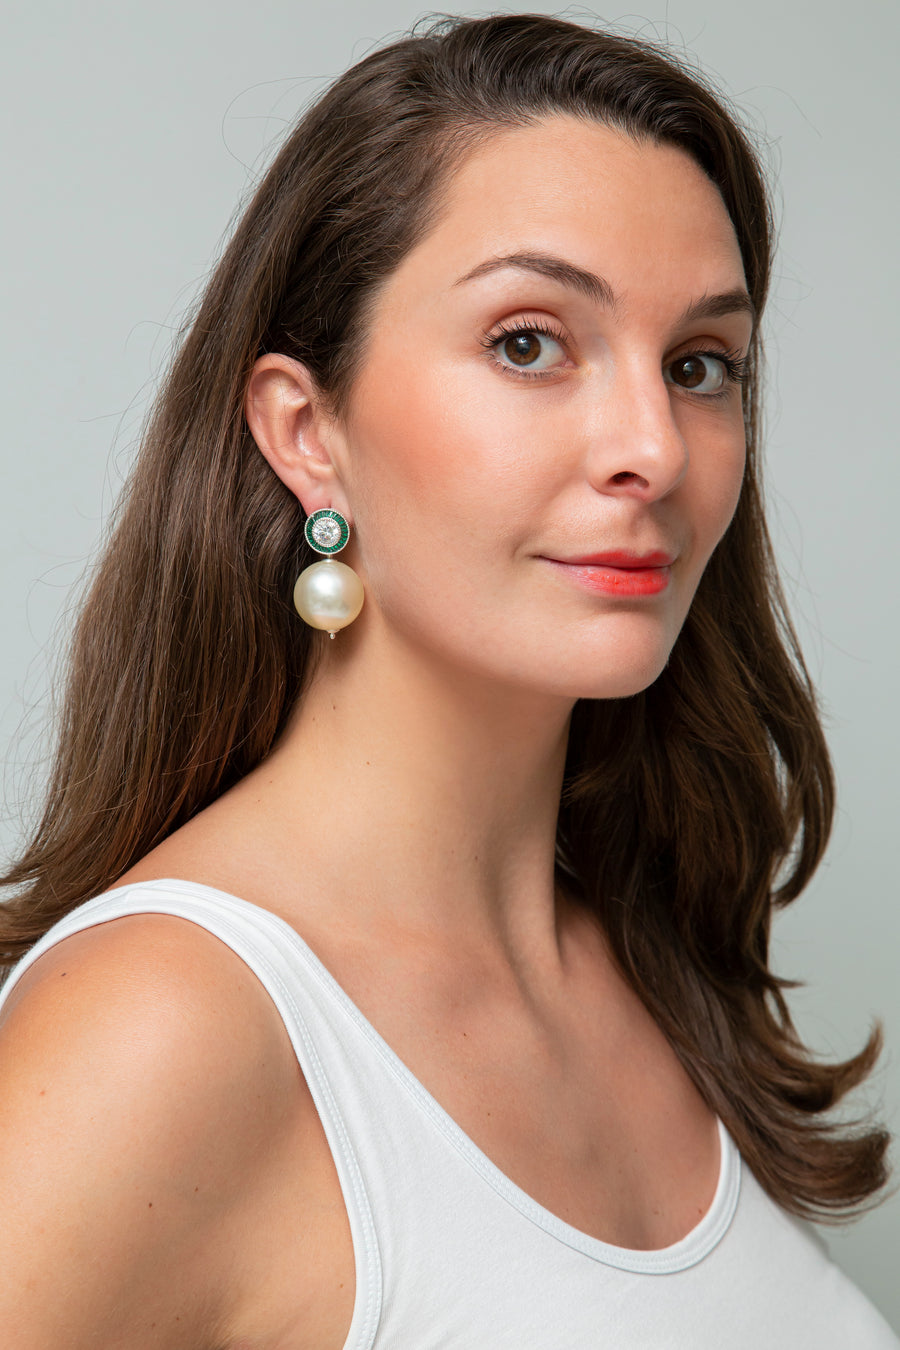 Sparkly Green and Silver Round Drop Earring with Mini White Ball